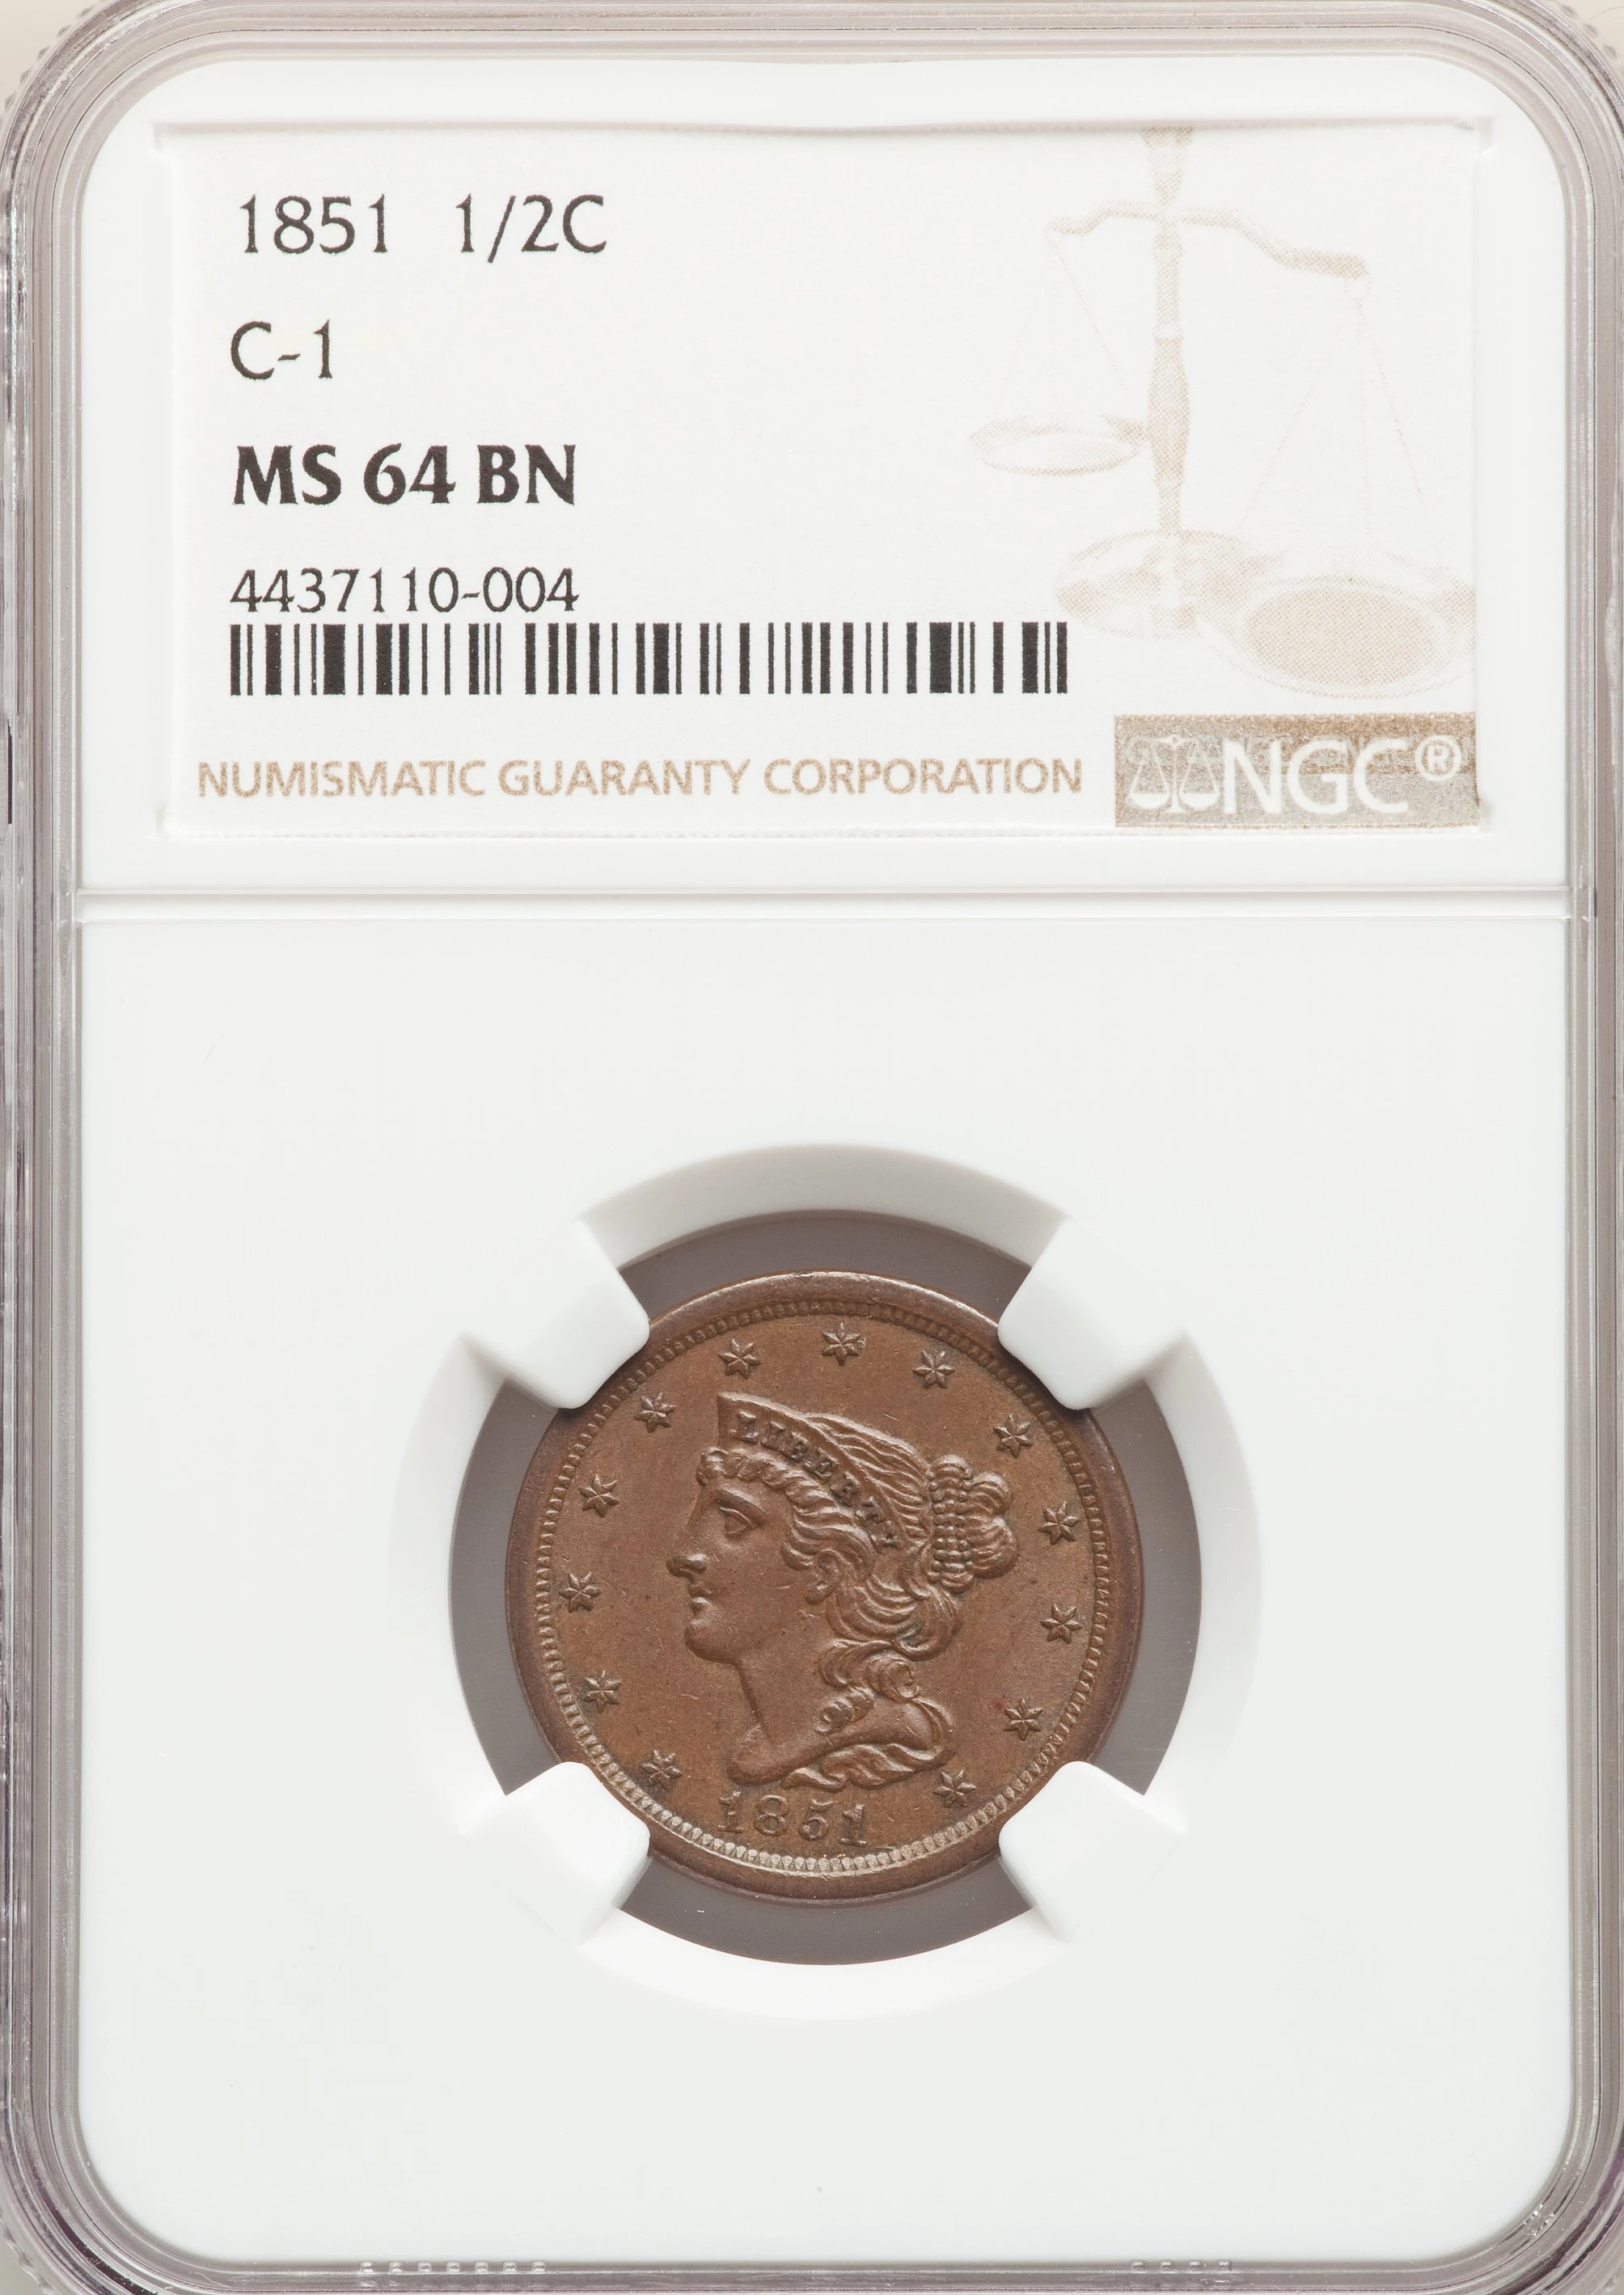 1851 Braided Hair Half Penny C 1 BN Coin Pricing Guide